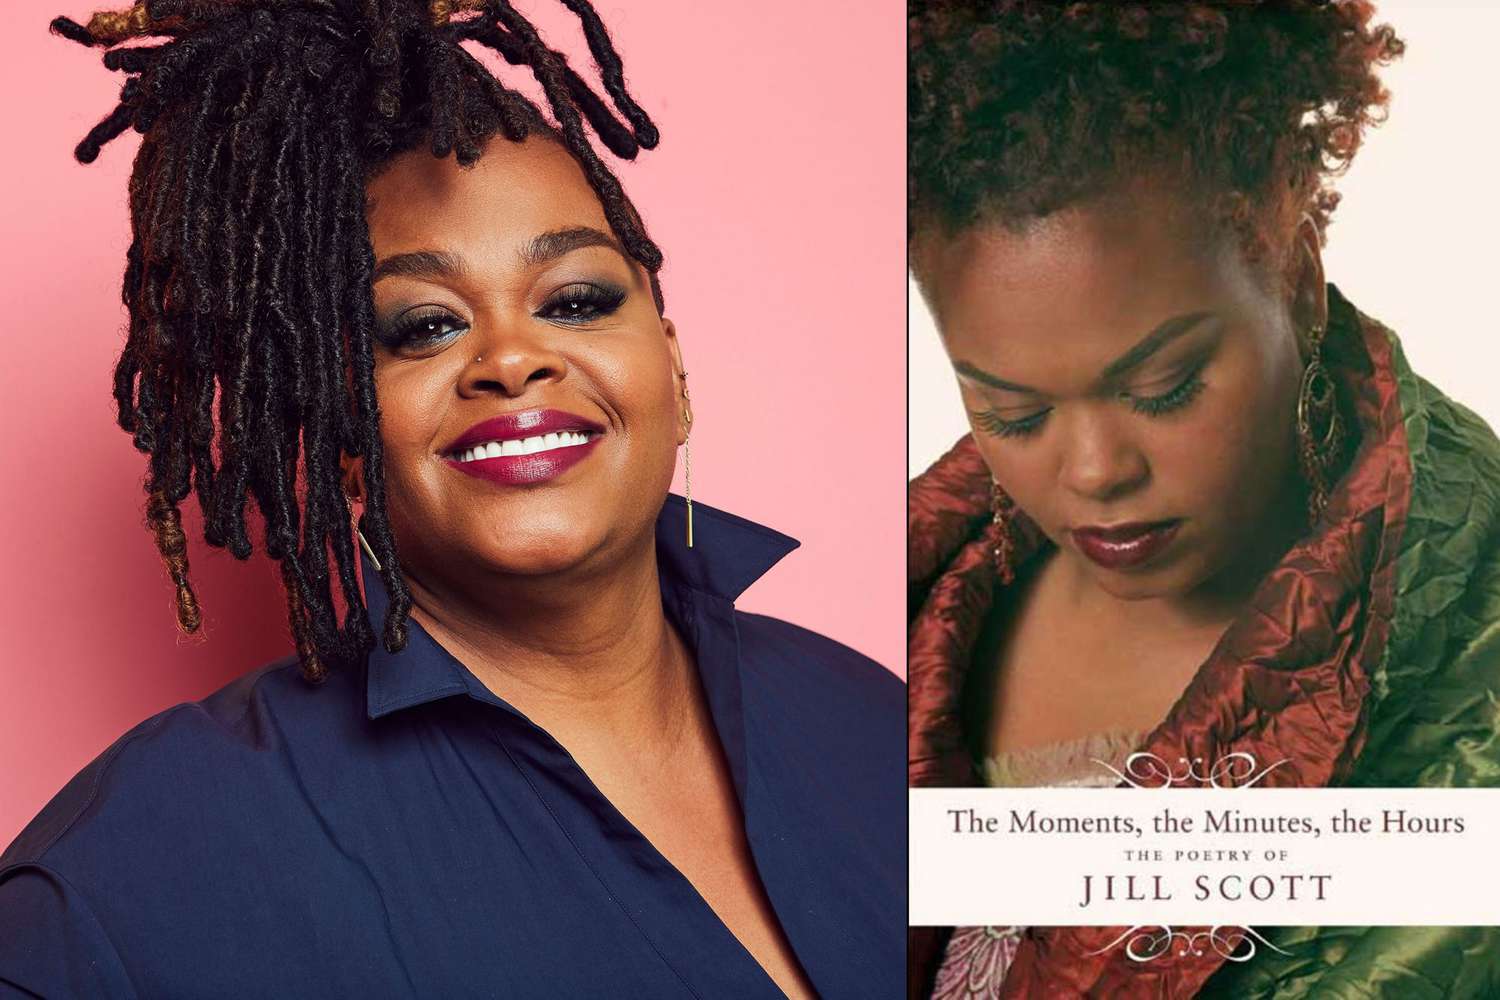 The Moments, the Minutes, the Hours- The Poetry of Jill Scott